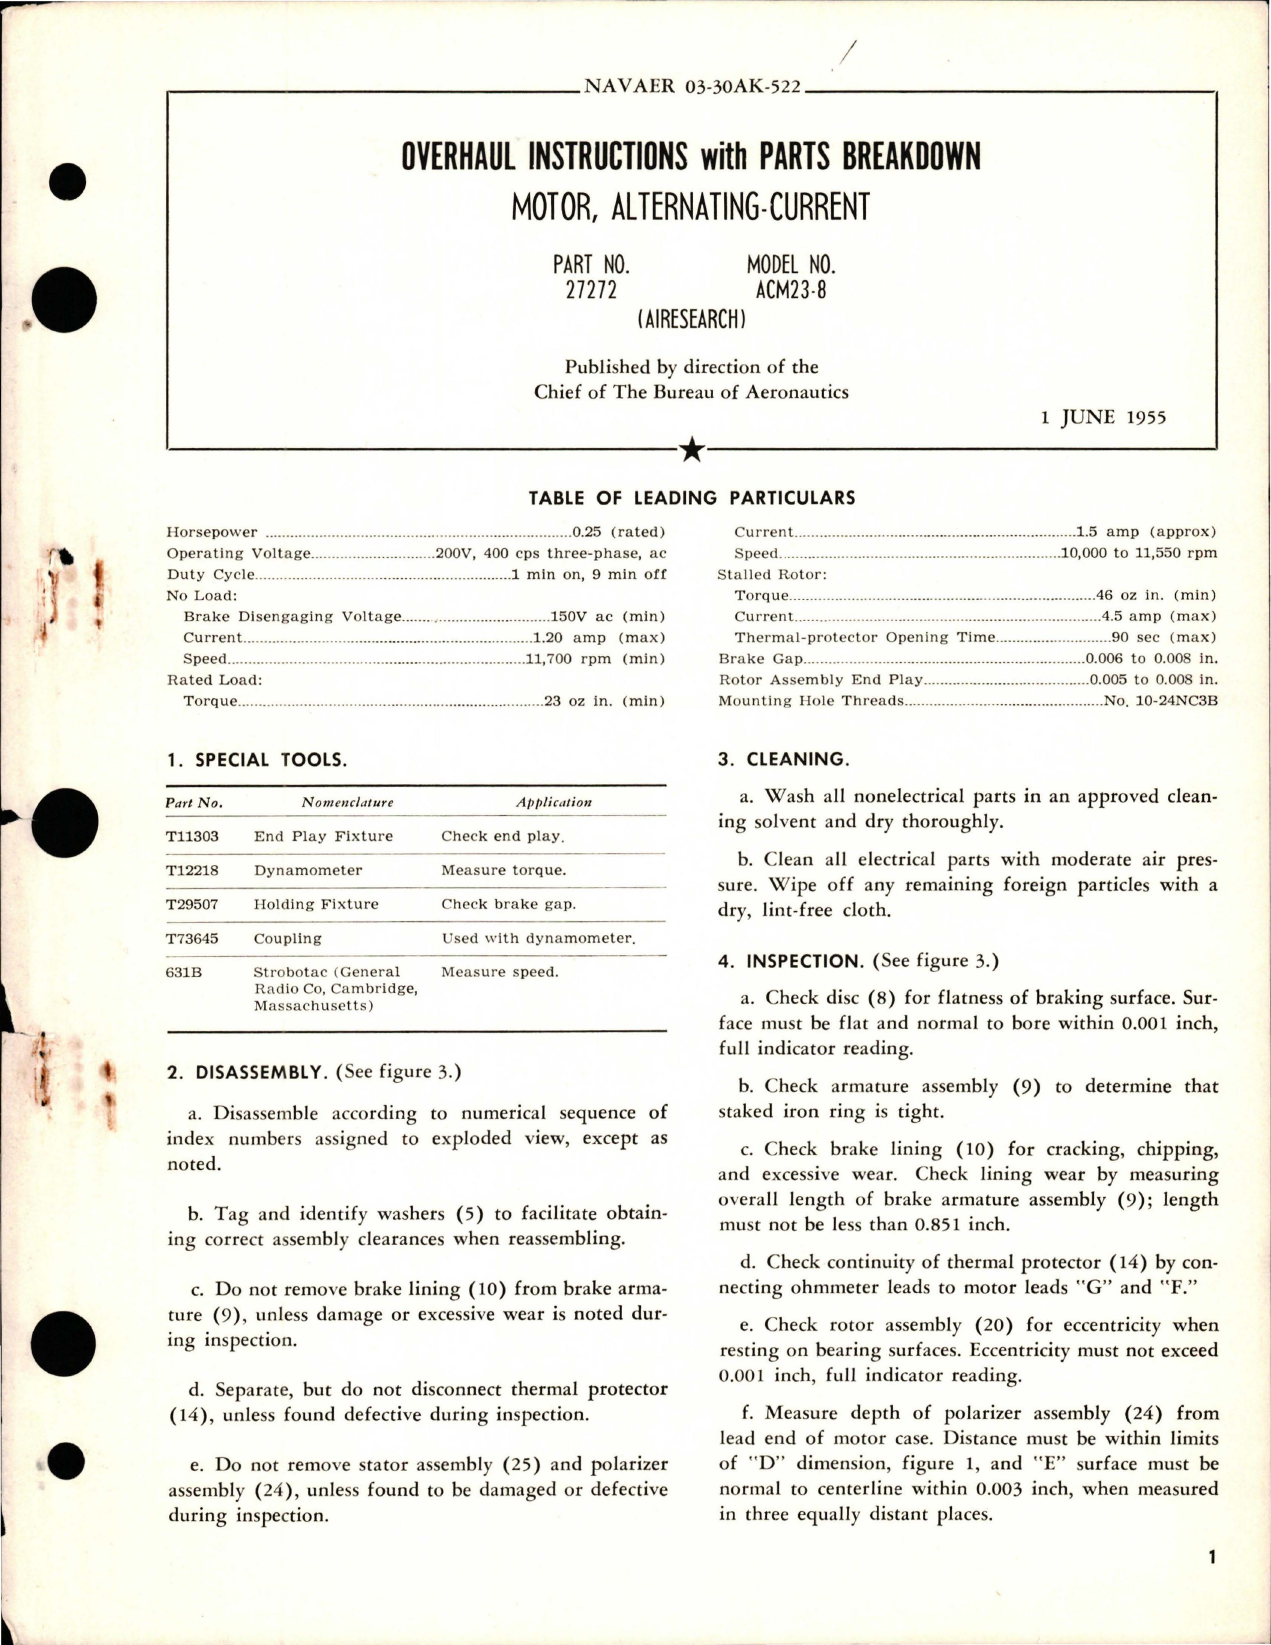 Sample page 1 from AirCorps Library document: Overhaul Instructions with Parts Breakdown for Alternating-Current Motor - Part 27272 - Model ACM23-8